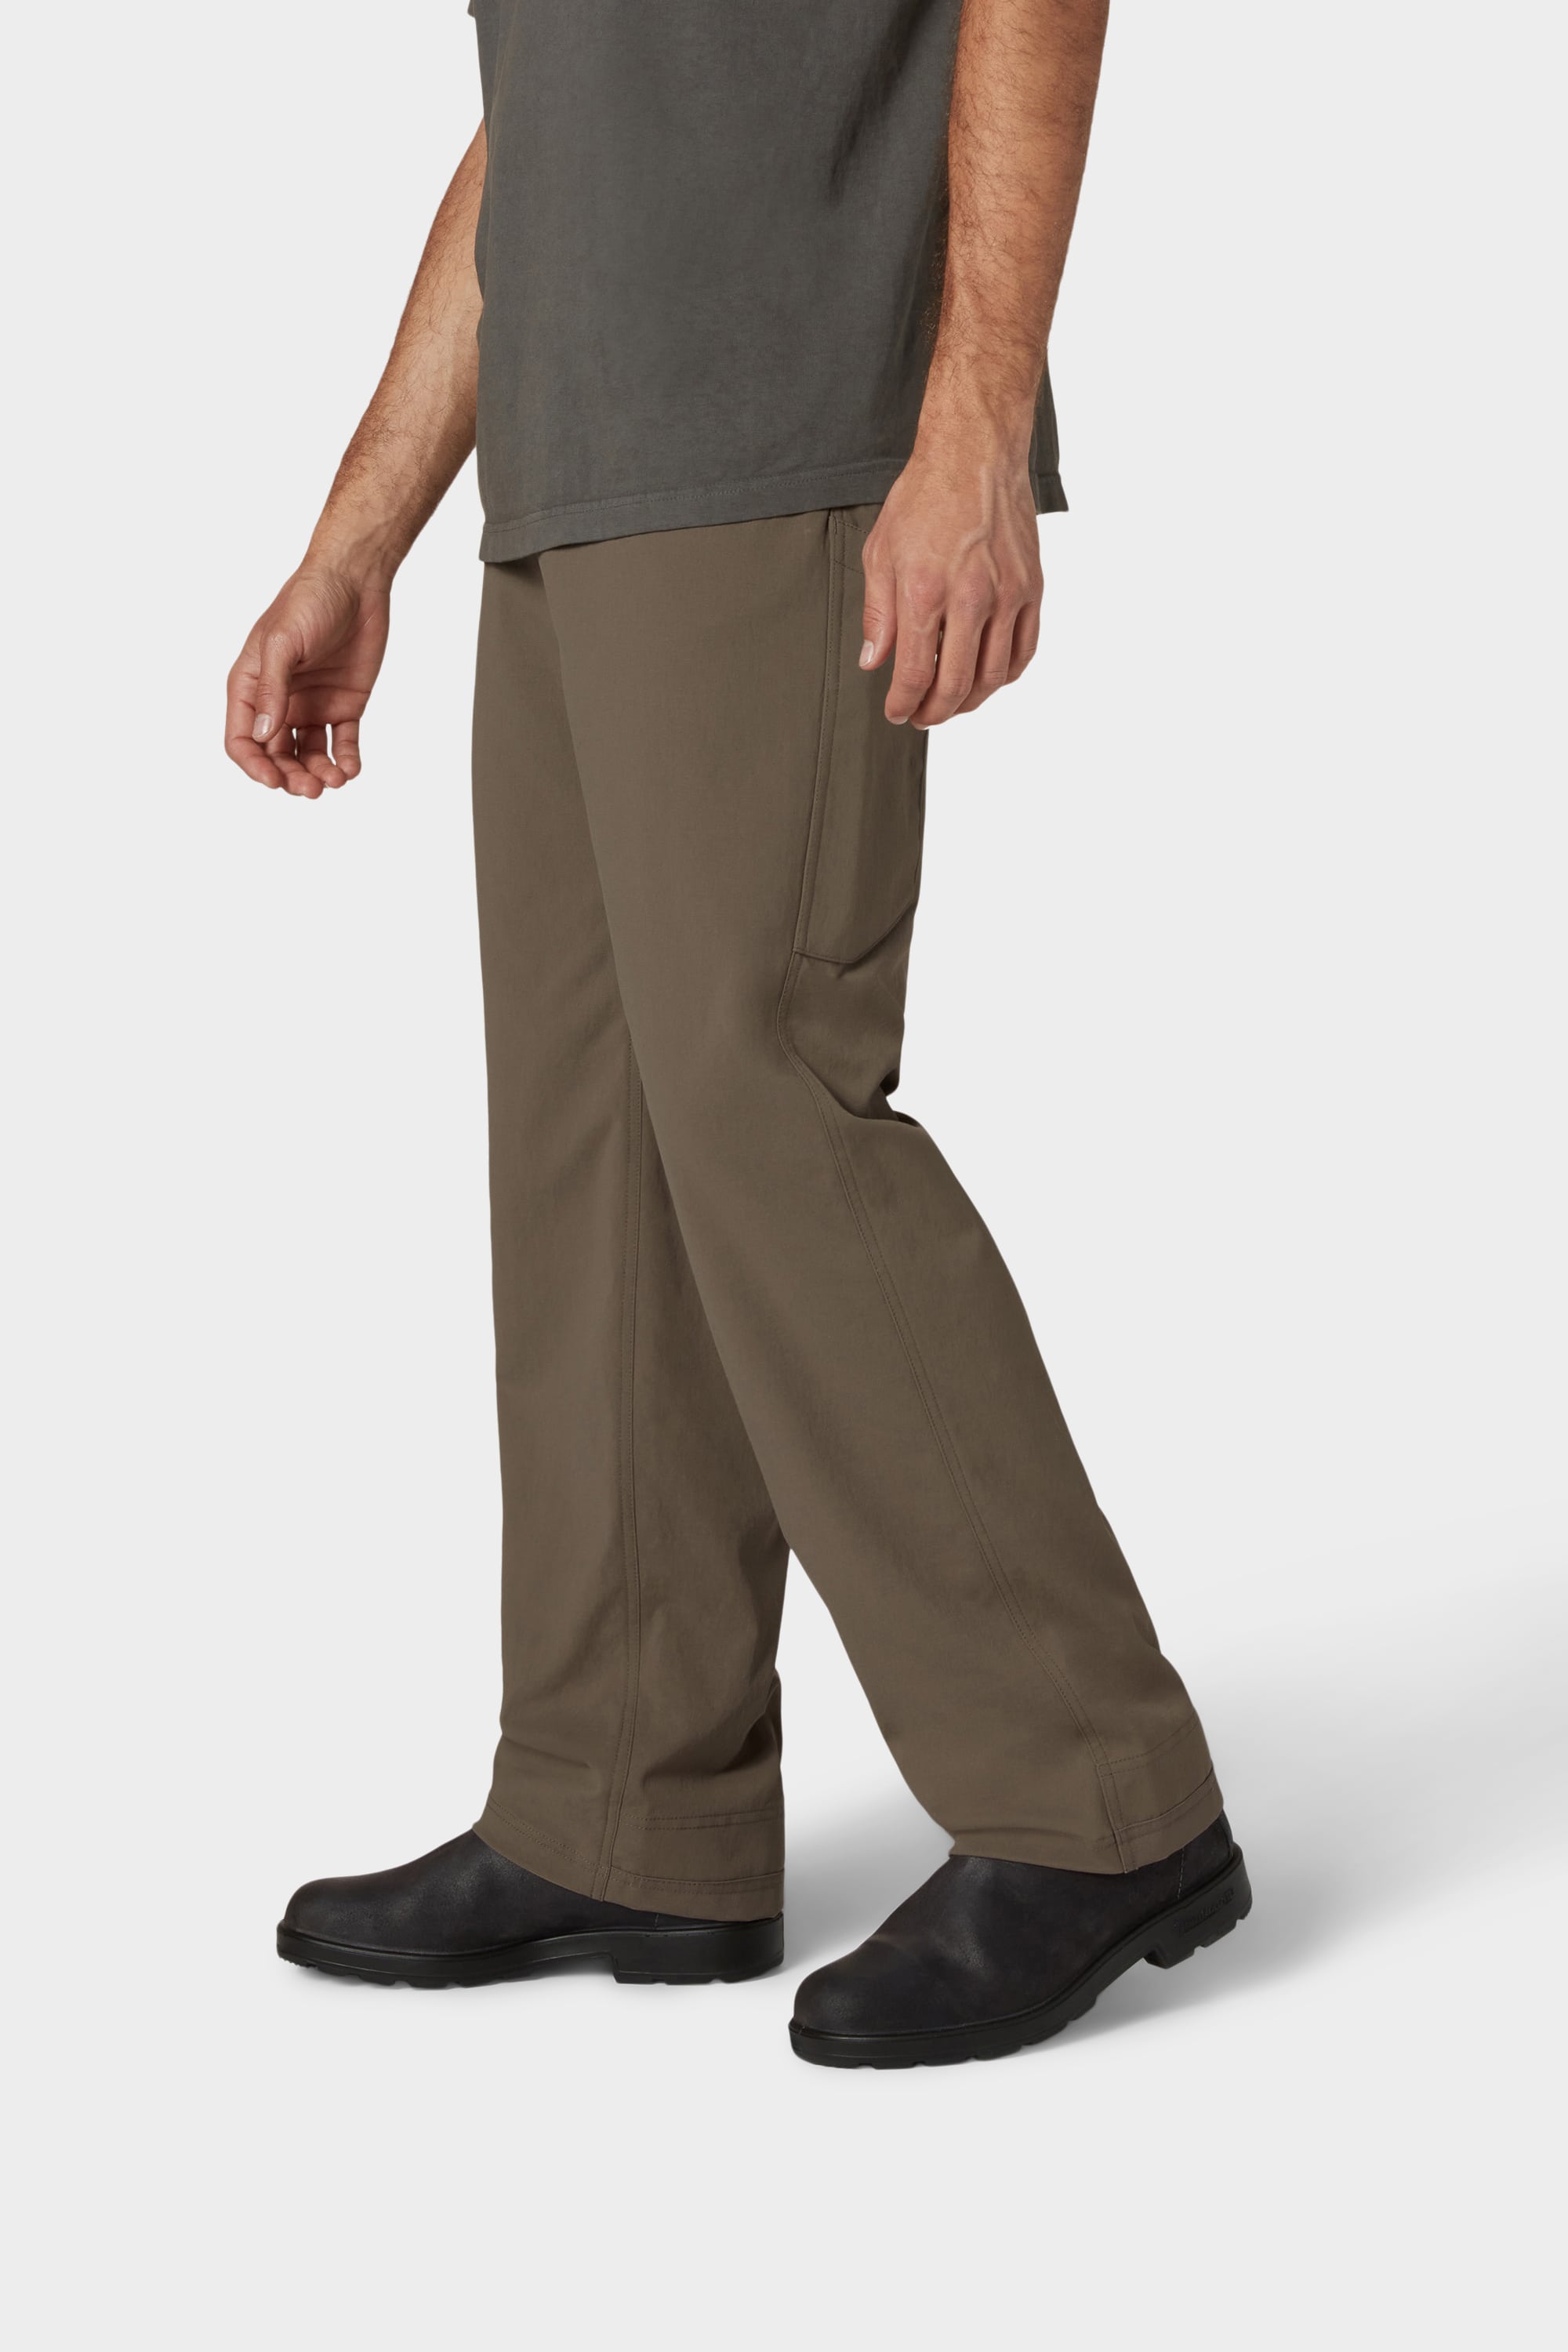 Mens Cargo Pant - Shop Cargo Style Trousers for Men | Mufti